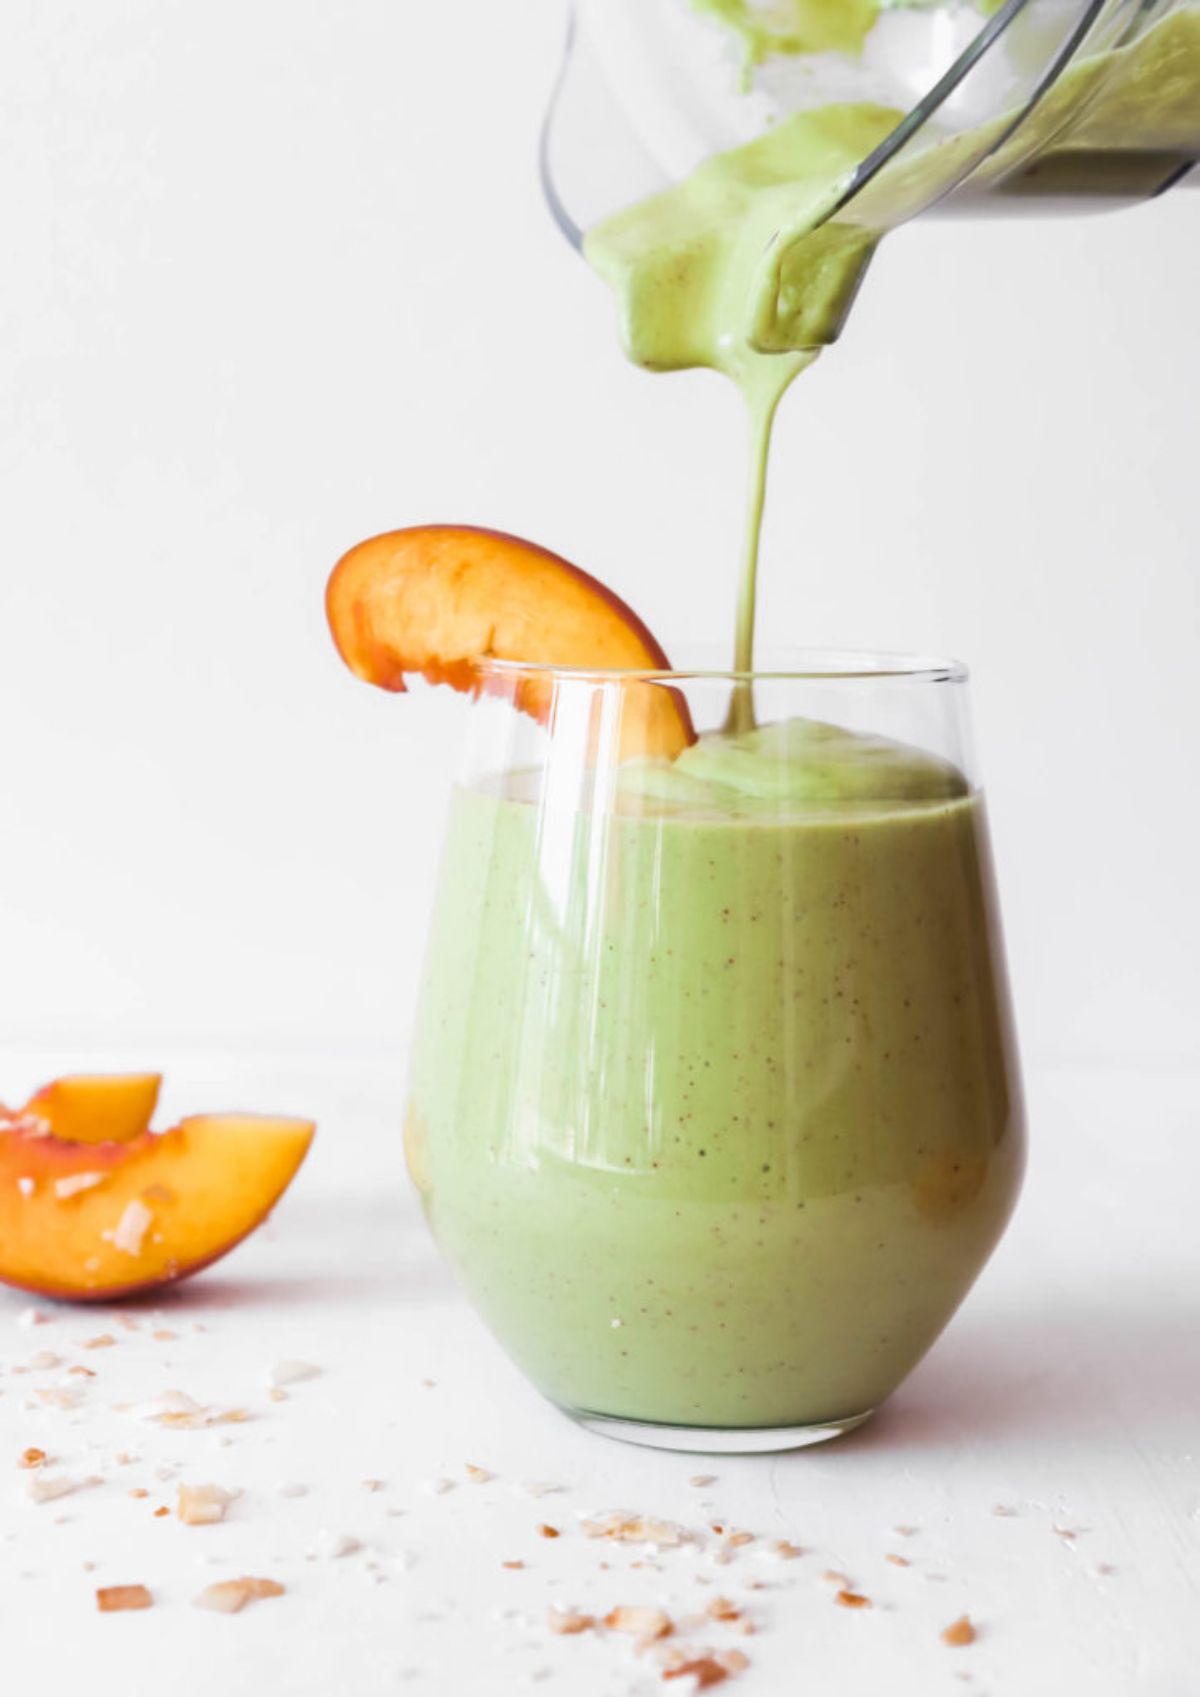 A glass with green smoothie being poured into it from a blender jug, the glass is garnished by a peach slice